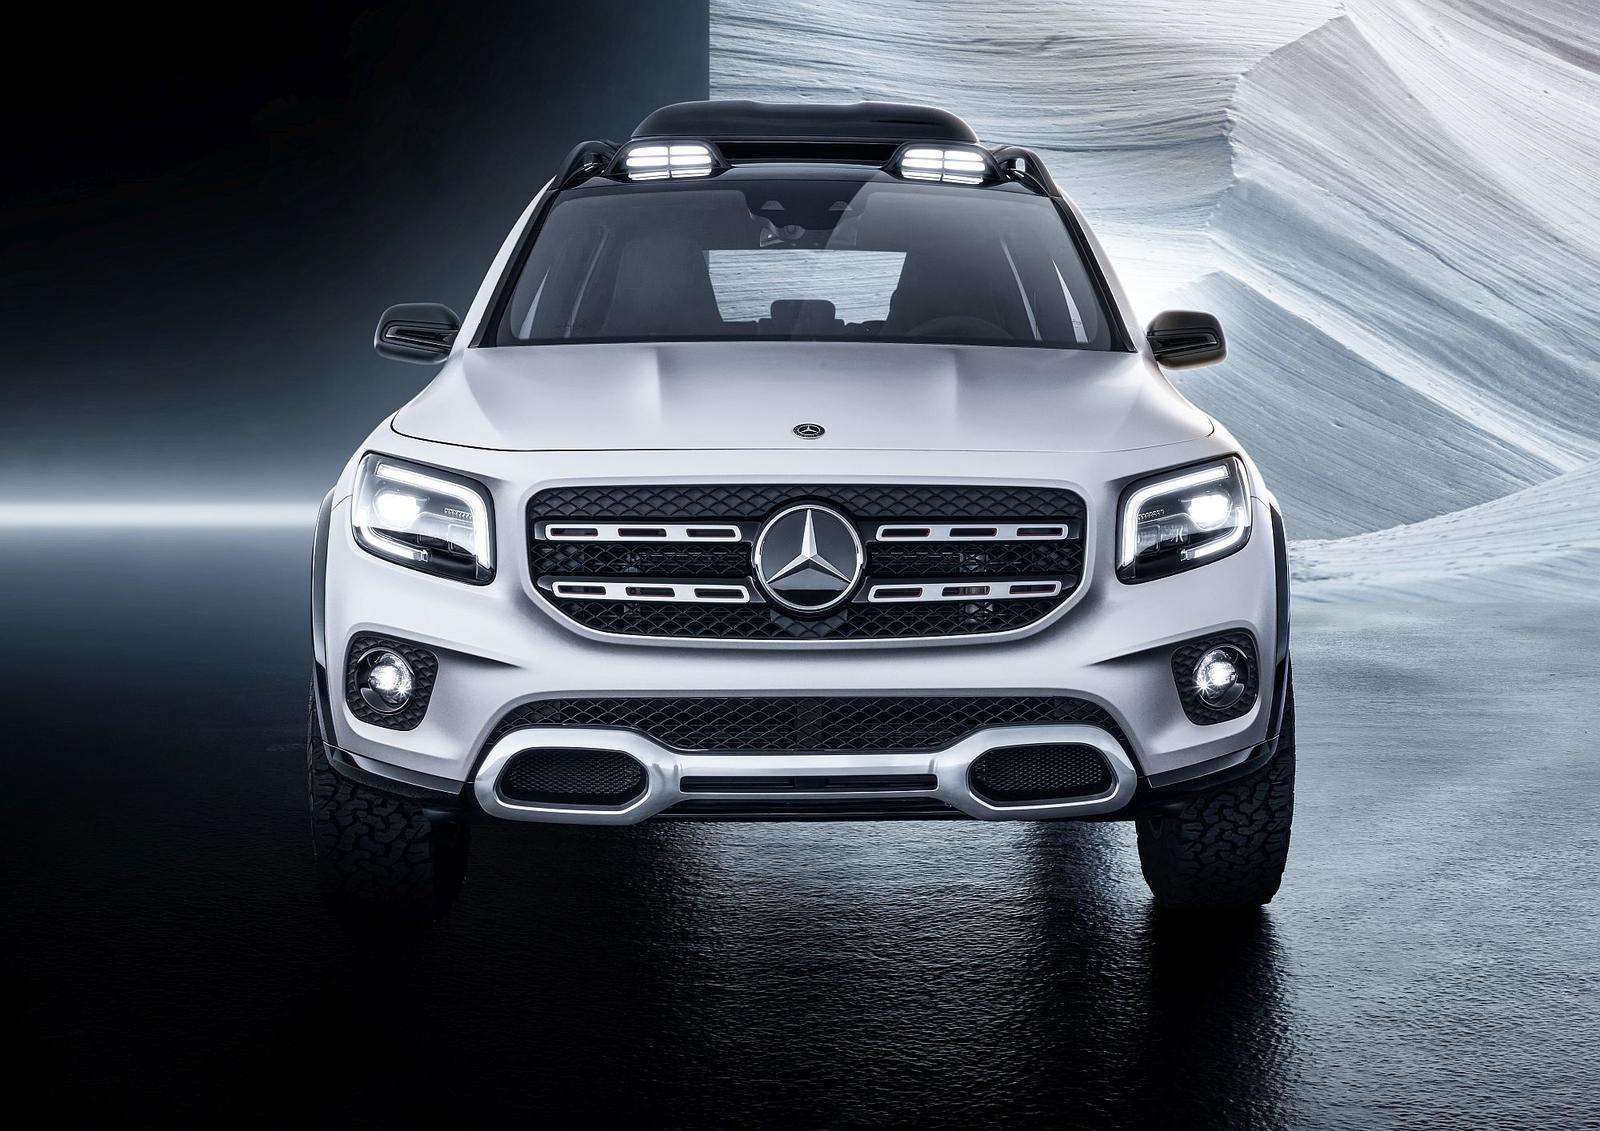 Mercedes-Benz Concept GLB: So geräumig und robust kann kompakt sein

Mercedes-Benz Concept GLB: This is how spacious and robust a compact car can be